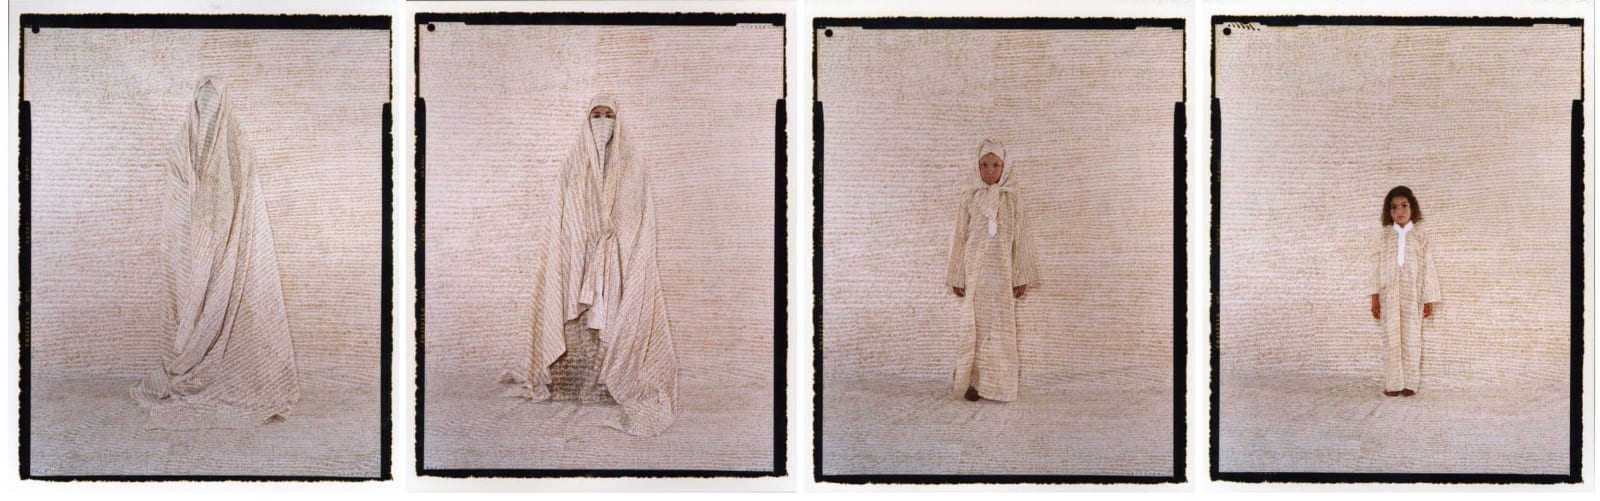 Four panels of figures in white clothing inscribed with henna calligraphy, by Lalla Essaydi